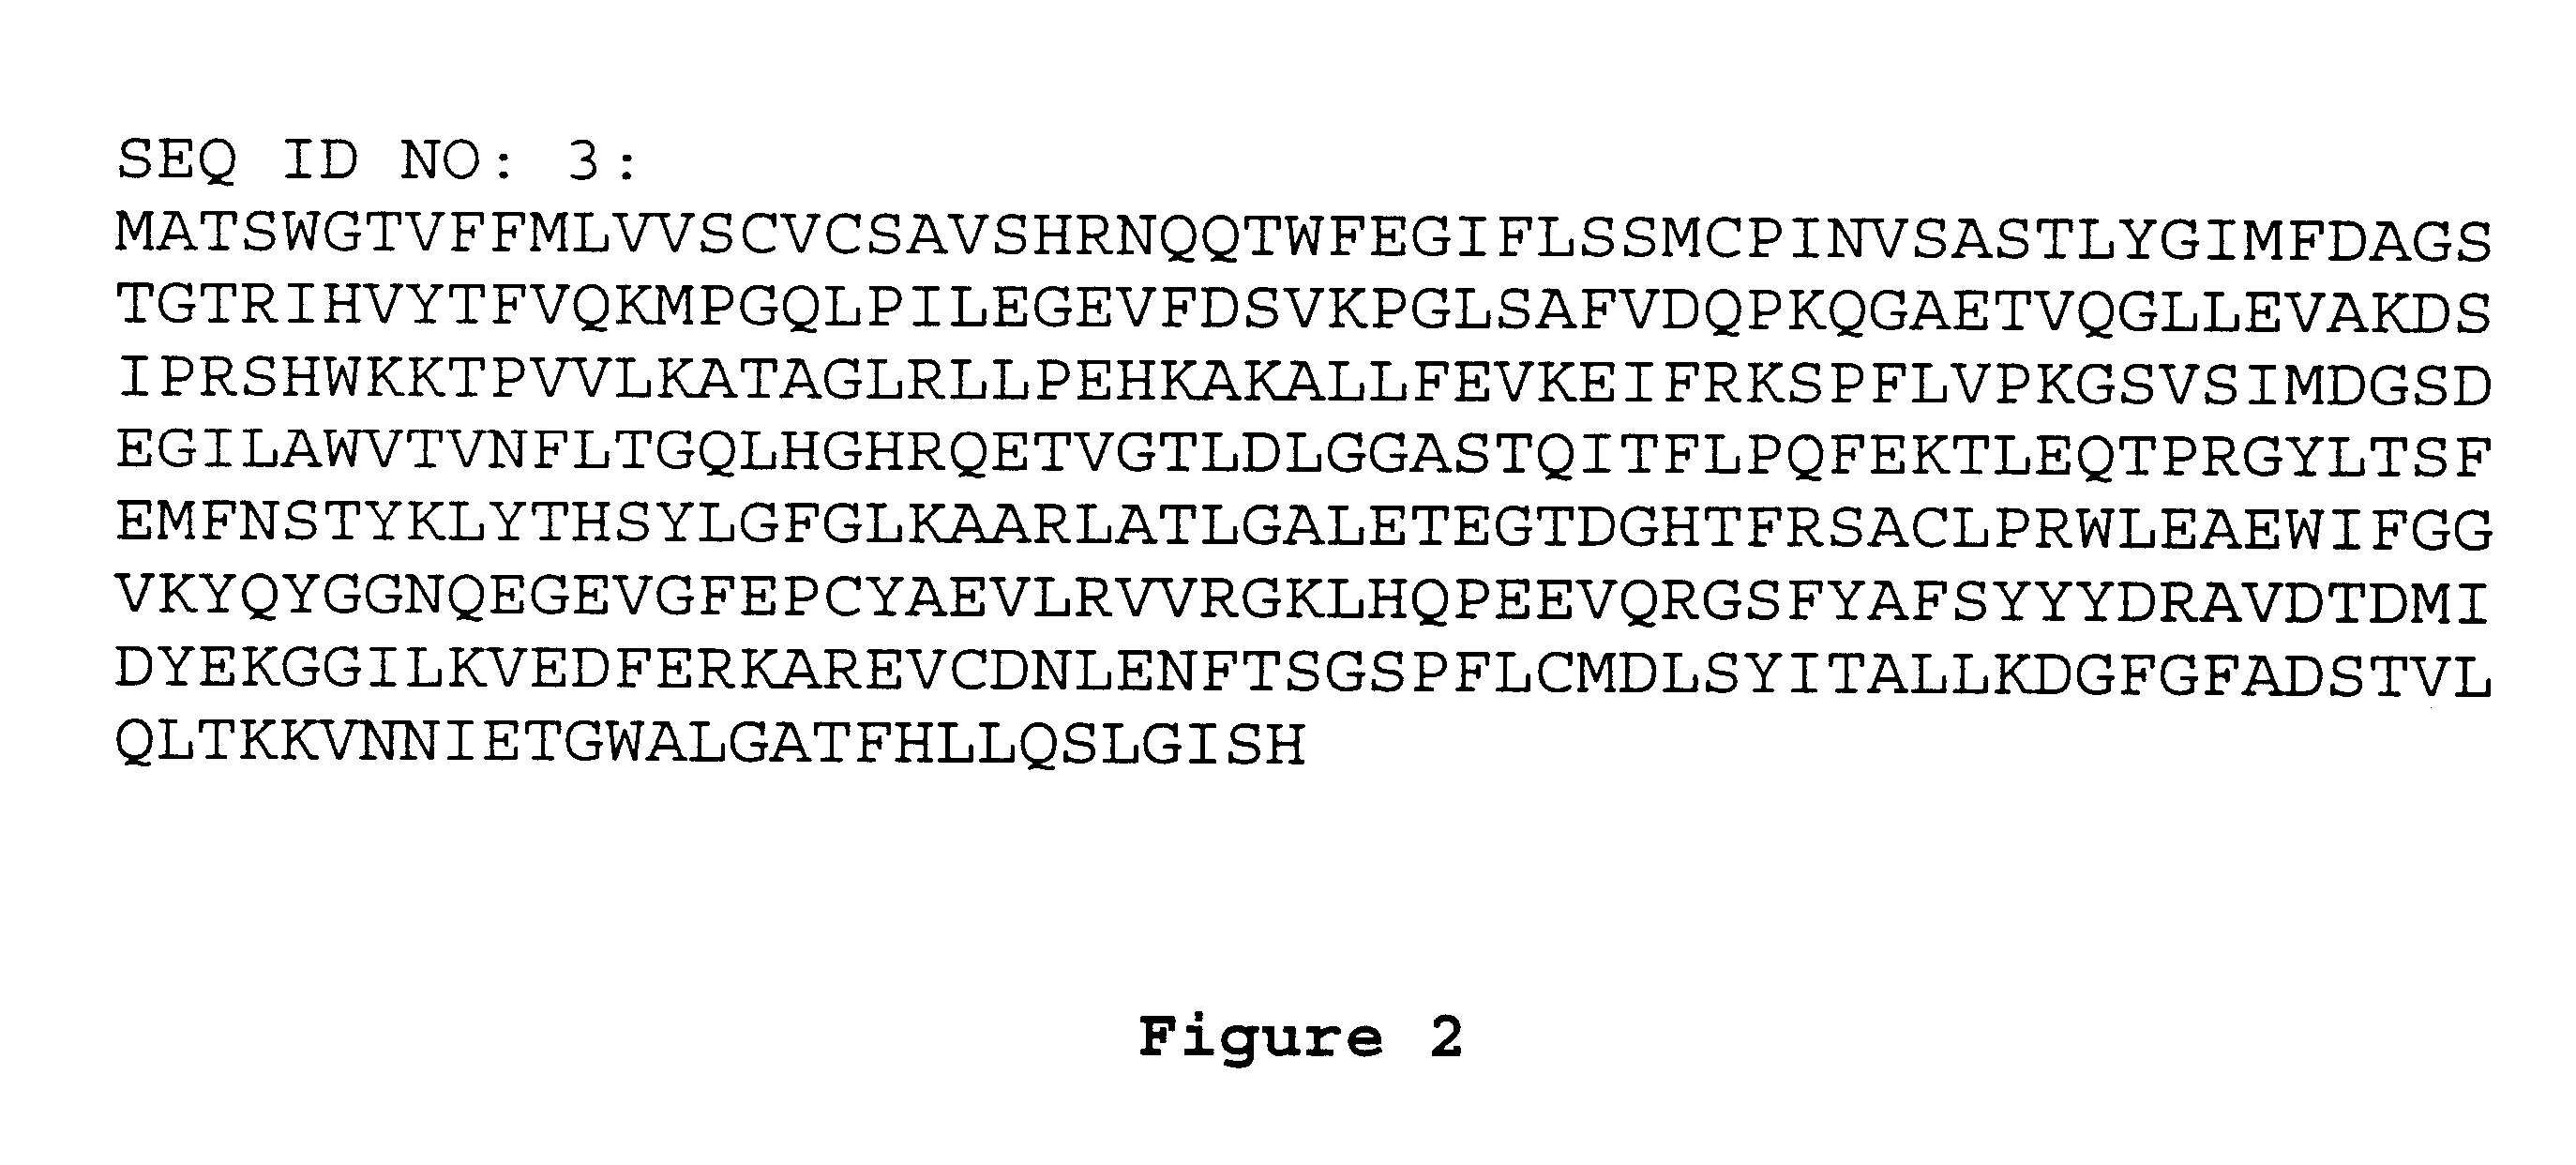 Methods and materials relating to novel CD39-like polypeptides